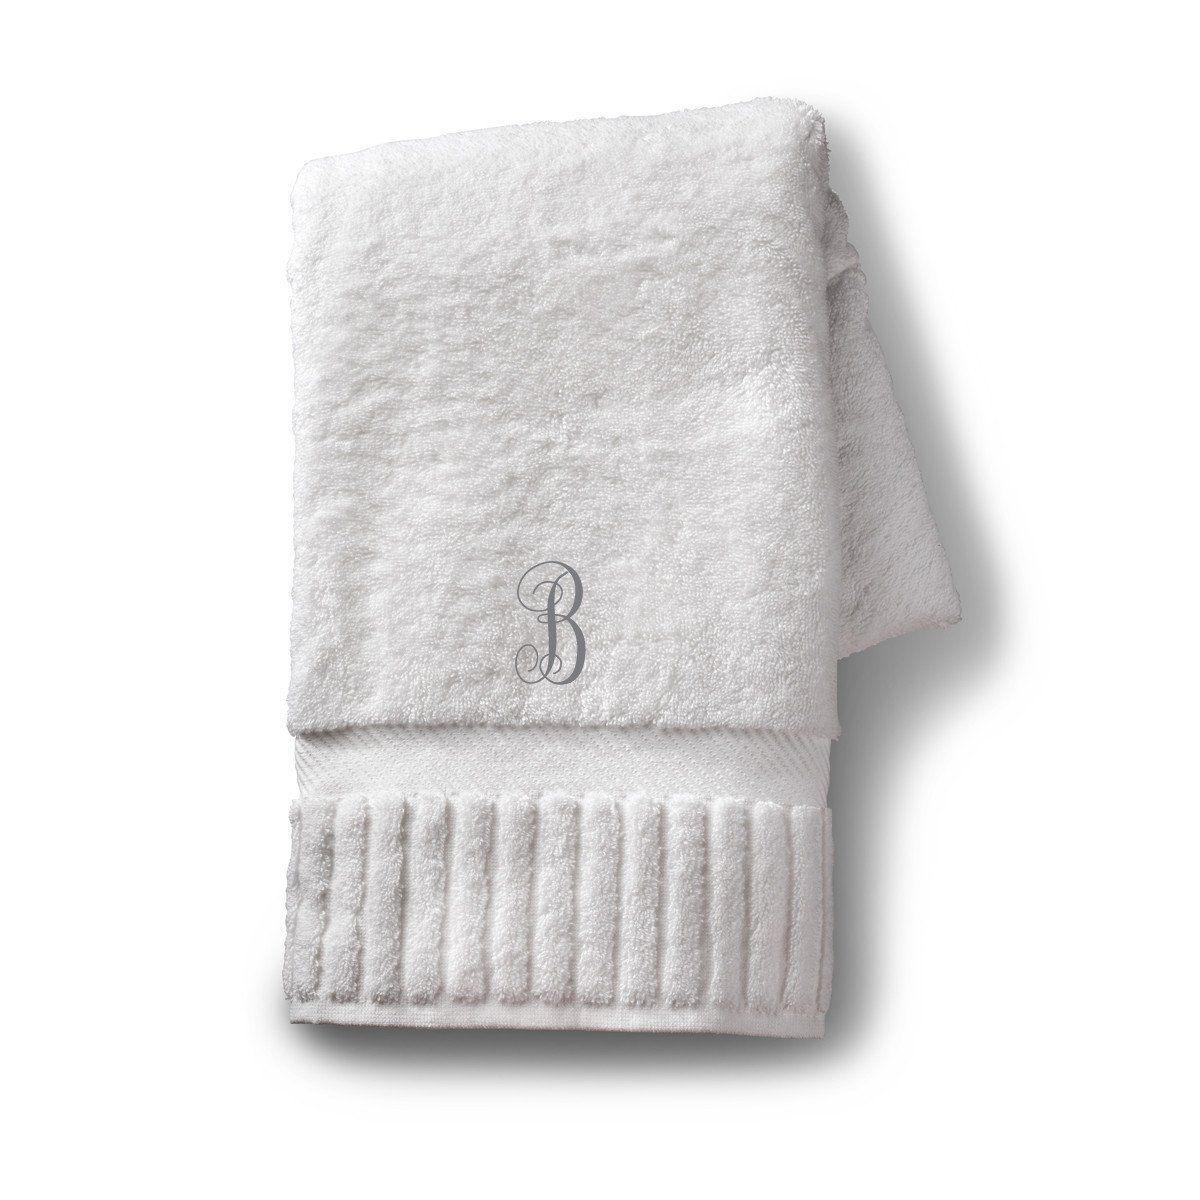 Personalized Towels - Set of 2